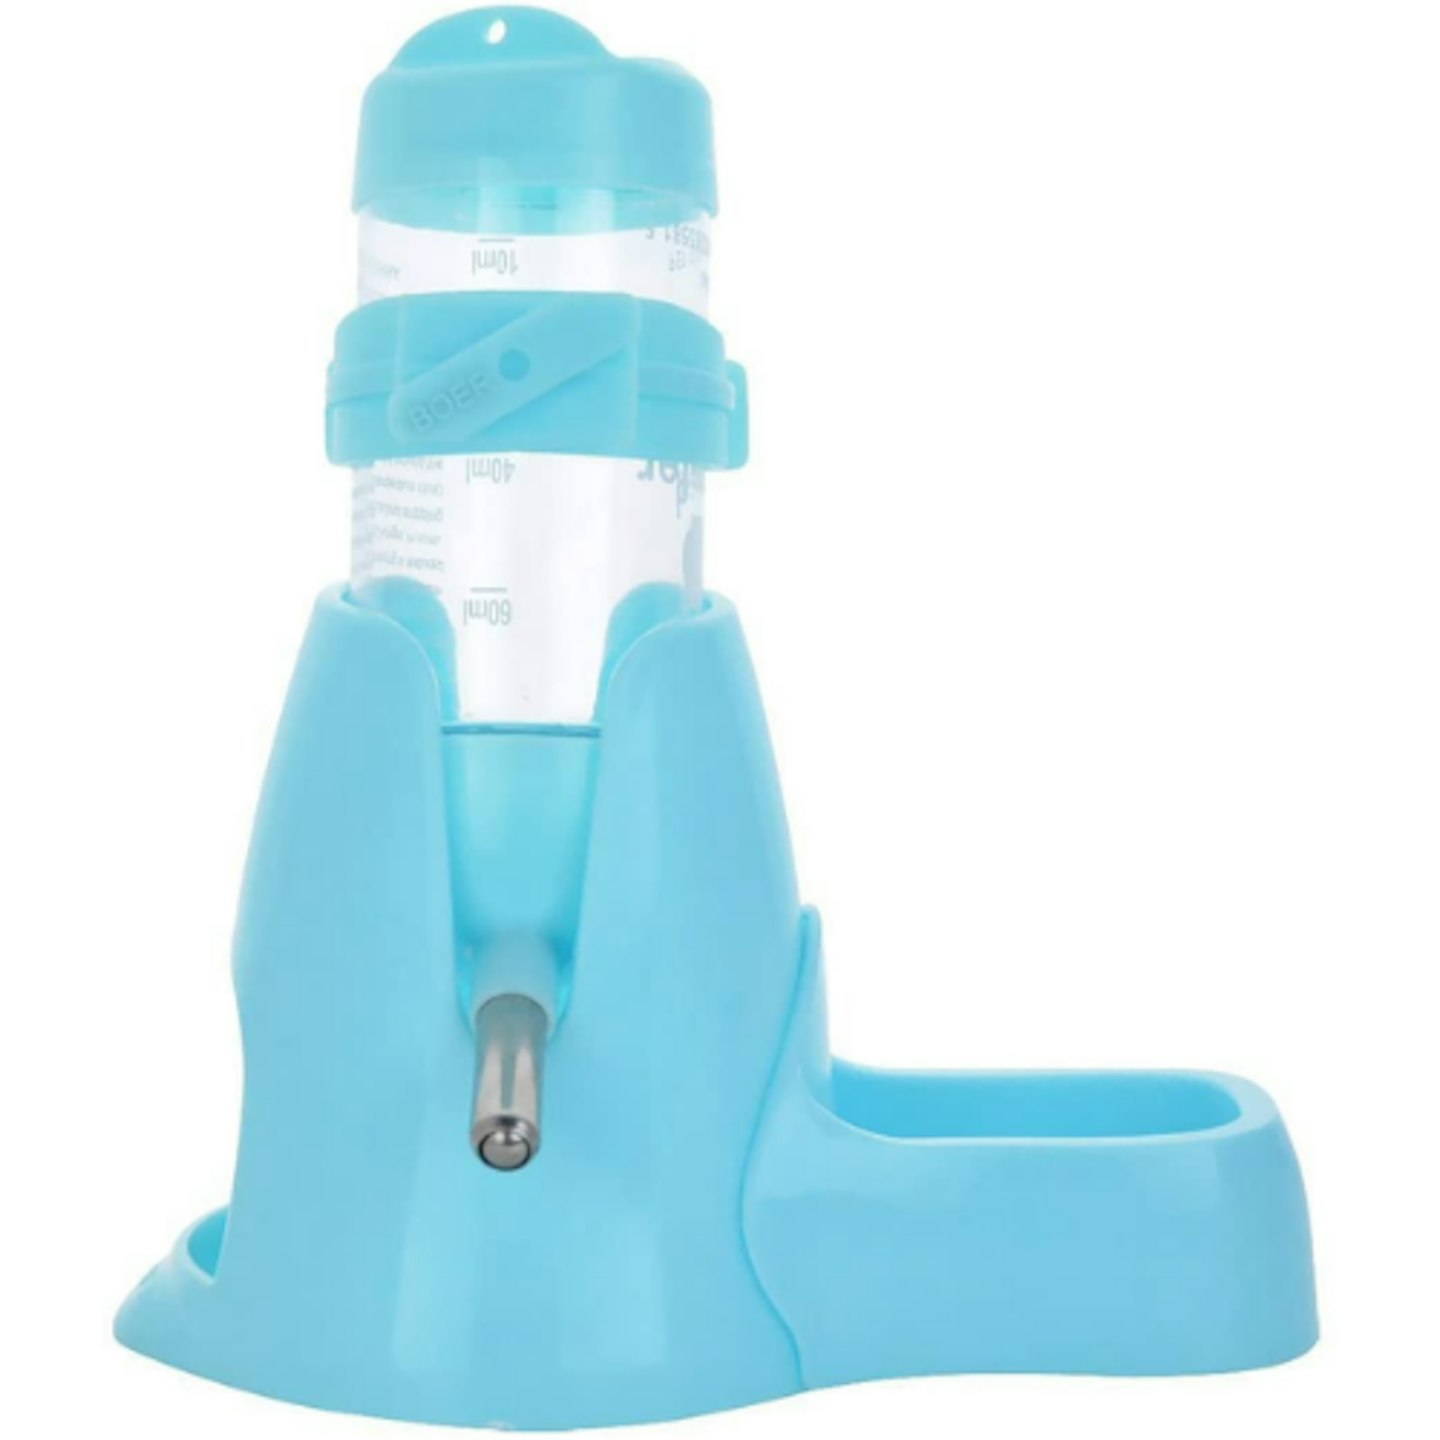 MOACC Hamsters Water Bottle Automatic Feeder